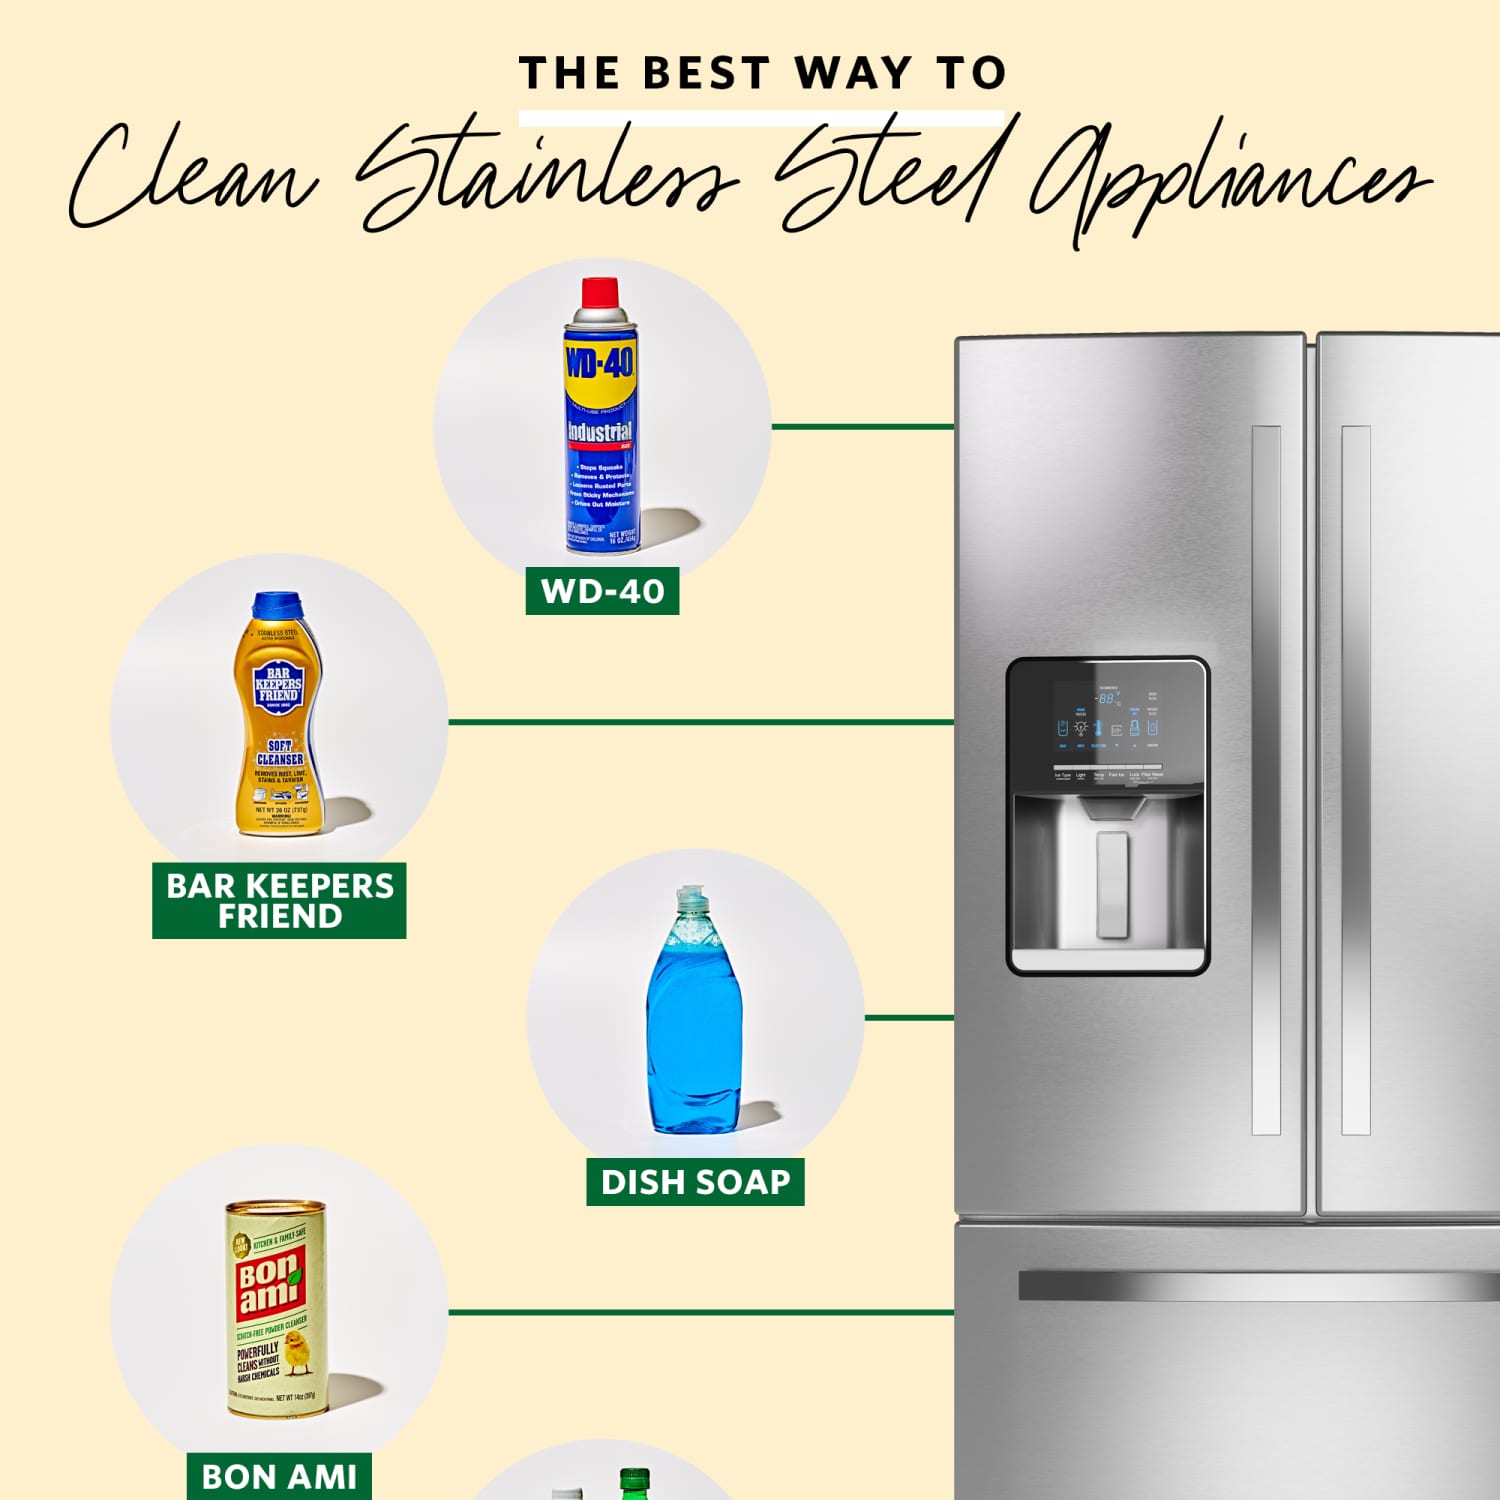 This Amazing Stainless Steel Cleaner Will Make Your Appliances Sparkle